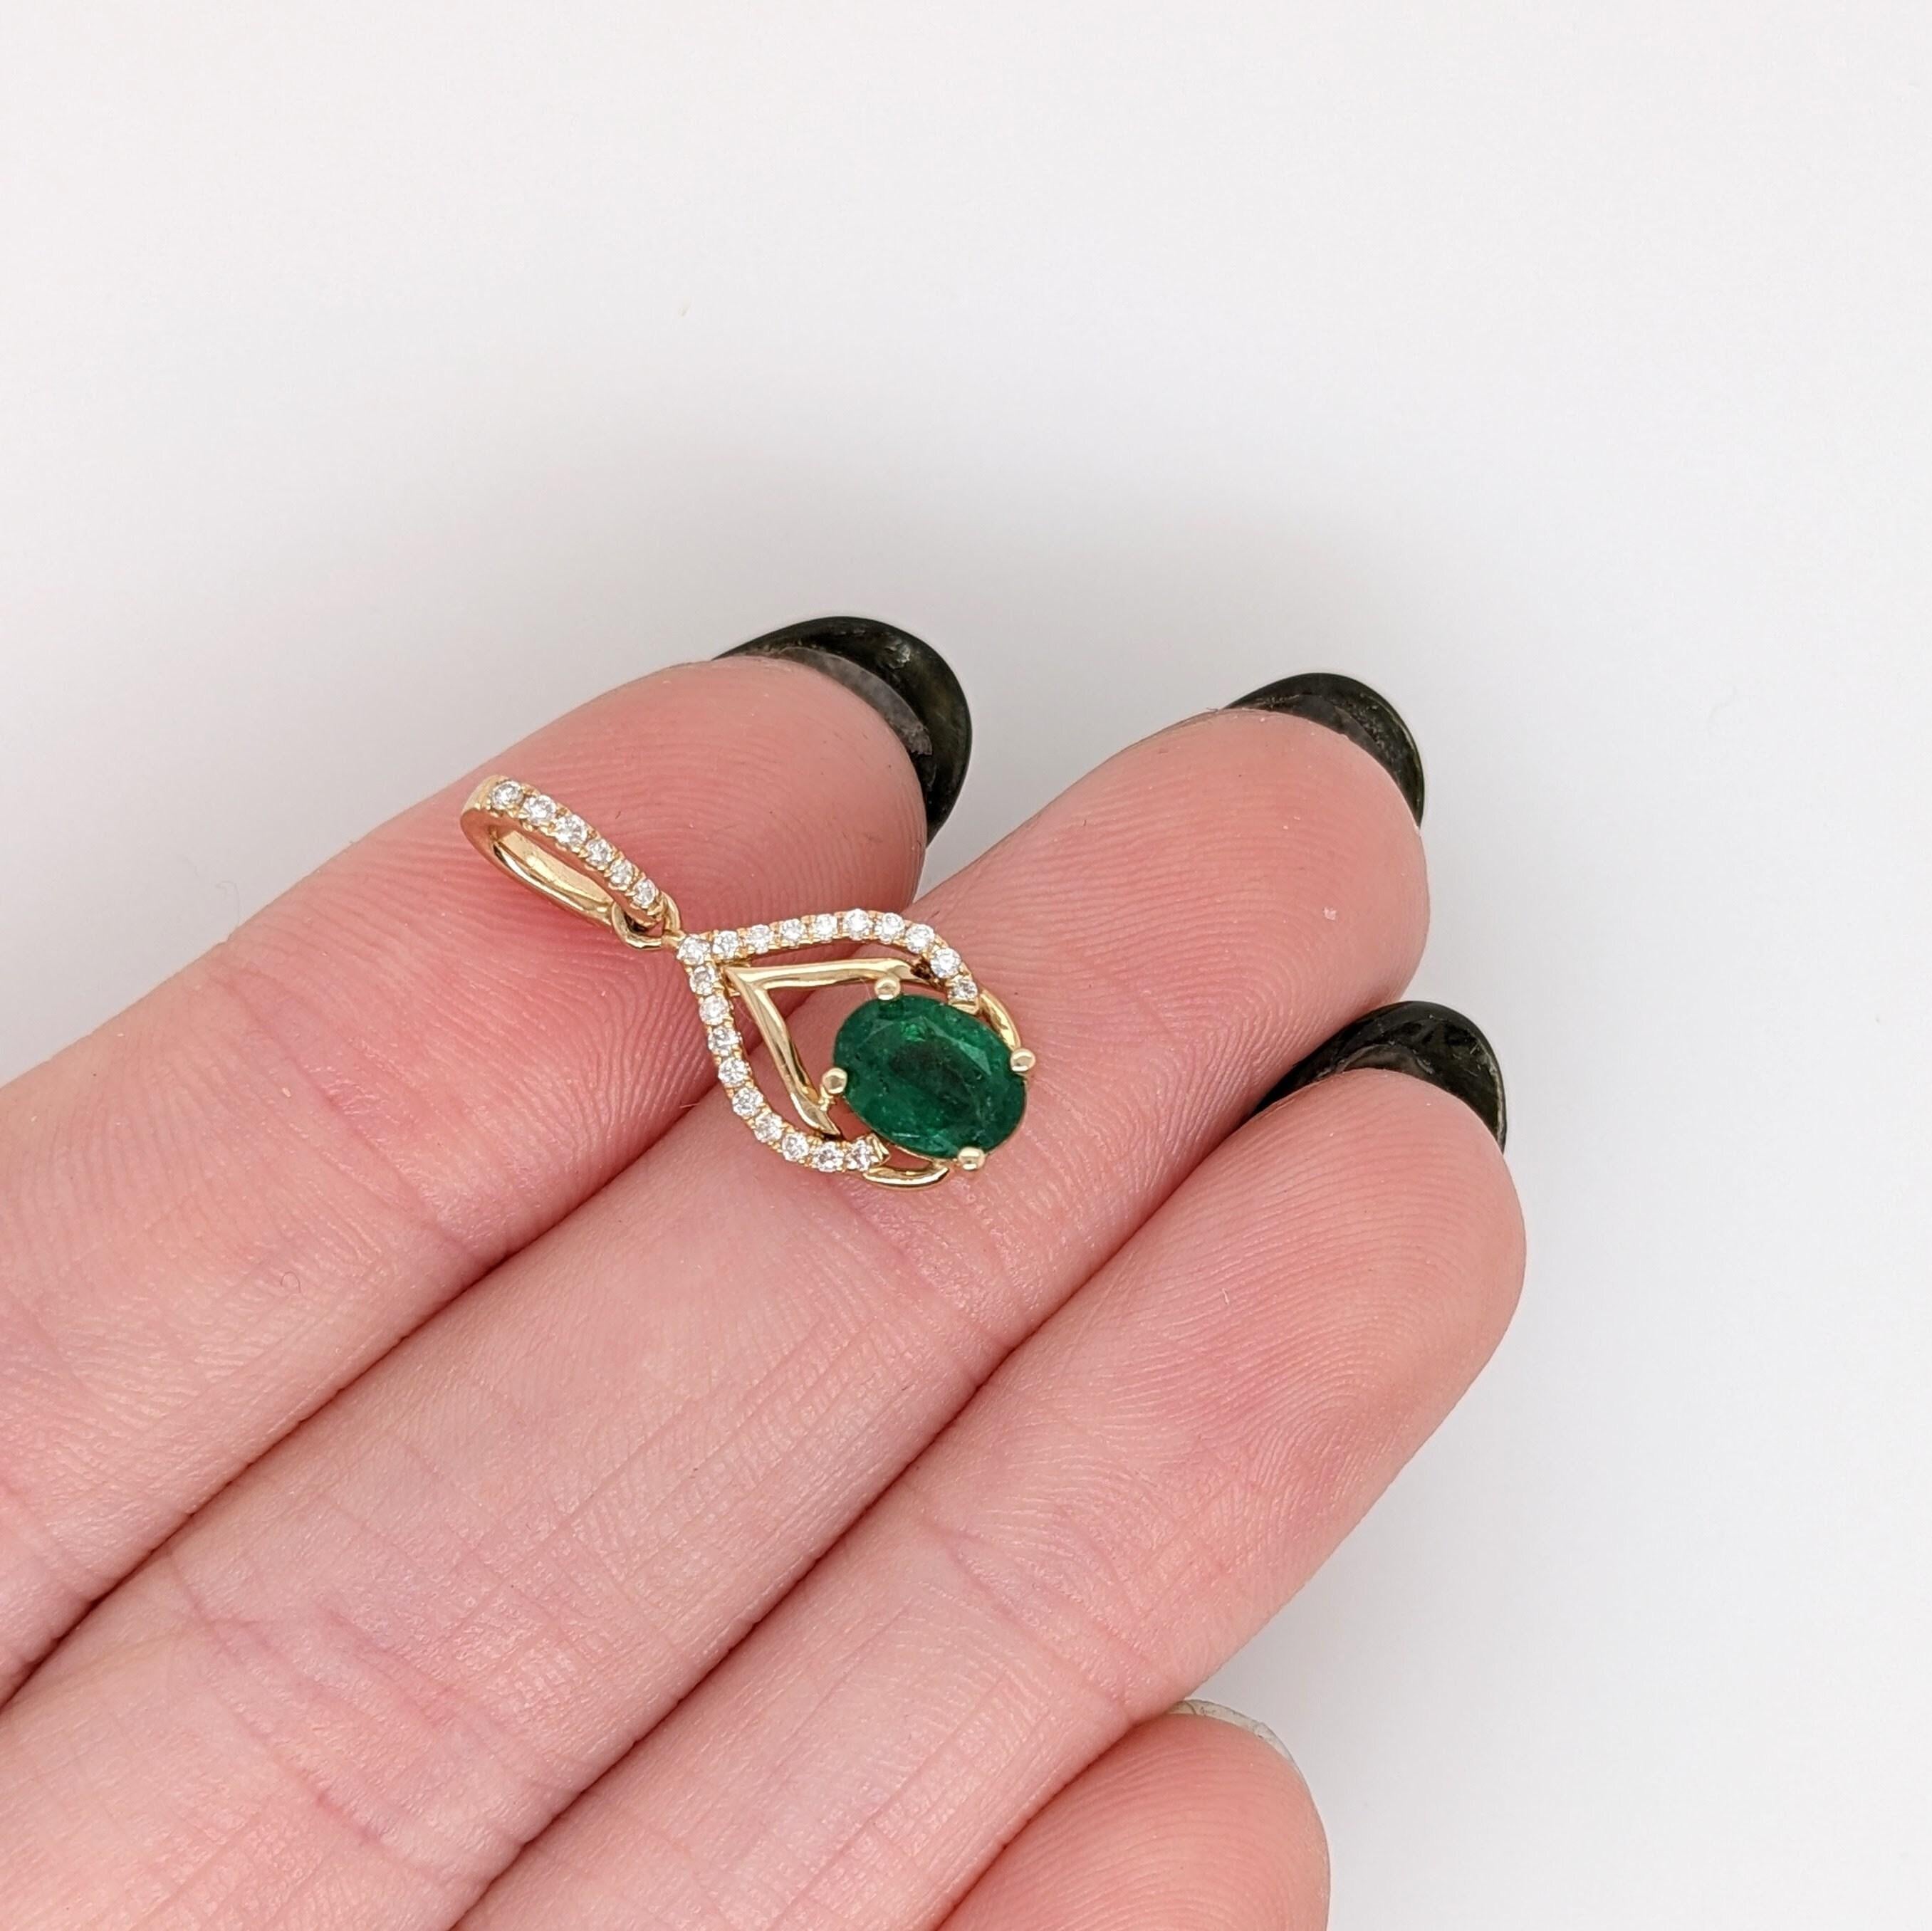 Emerald Pendant w Earth Mined Diamonds in Solid 14K Yellow Gold Oval 7x5mm For Sale 1